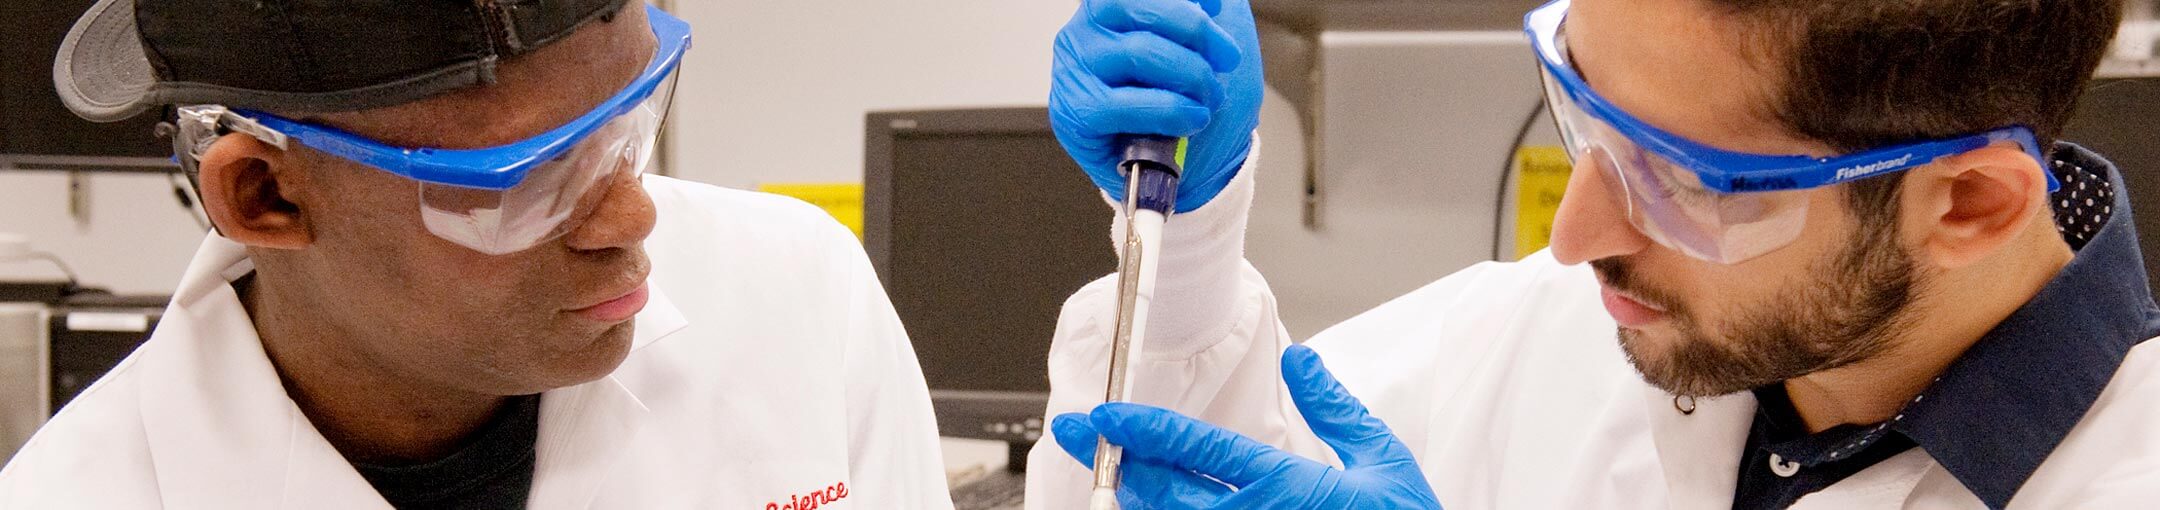 Two students wearing lab coats and protective goggles look at liquid in a pipette.